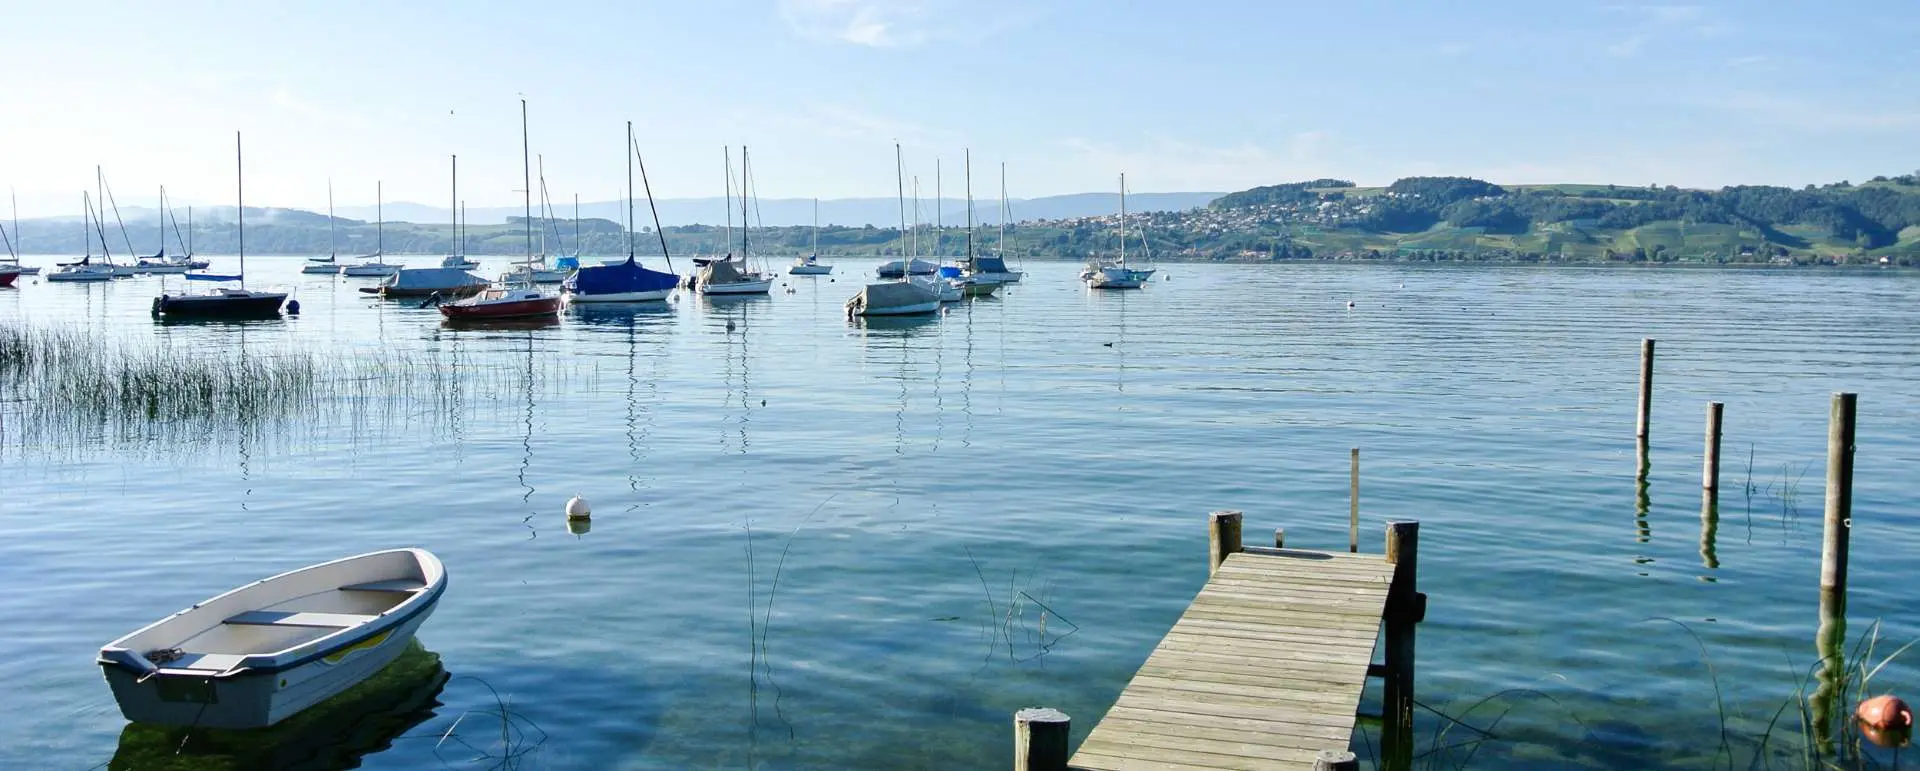 Lake Murten - the destination for workers